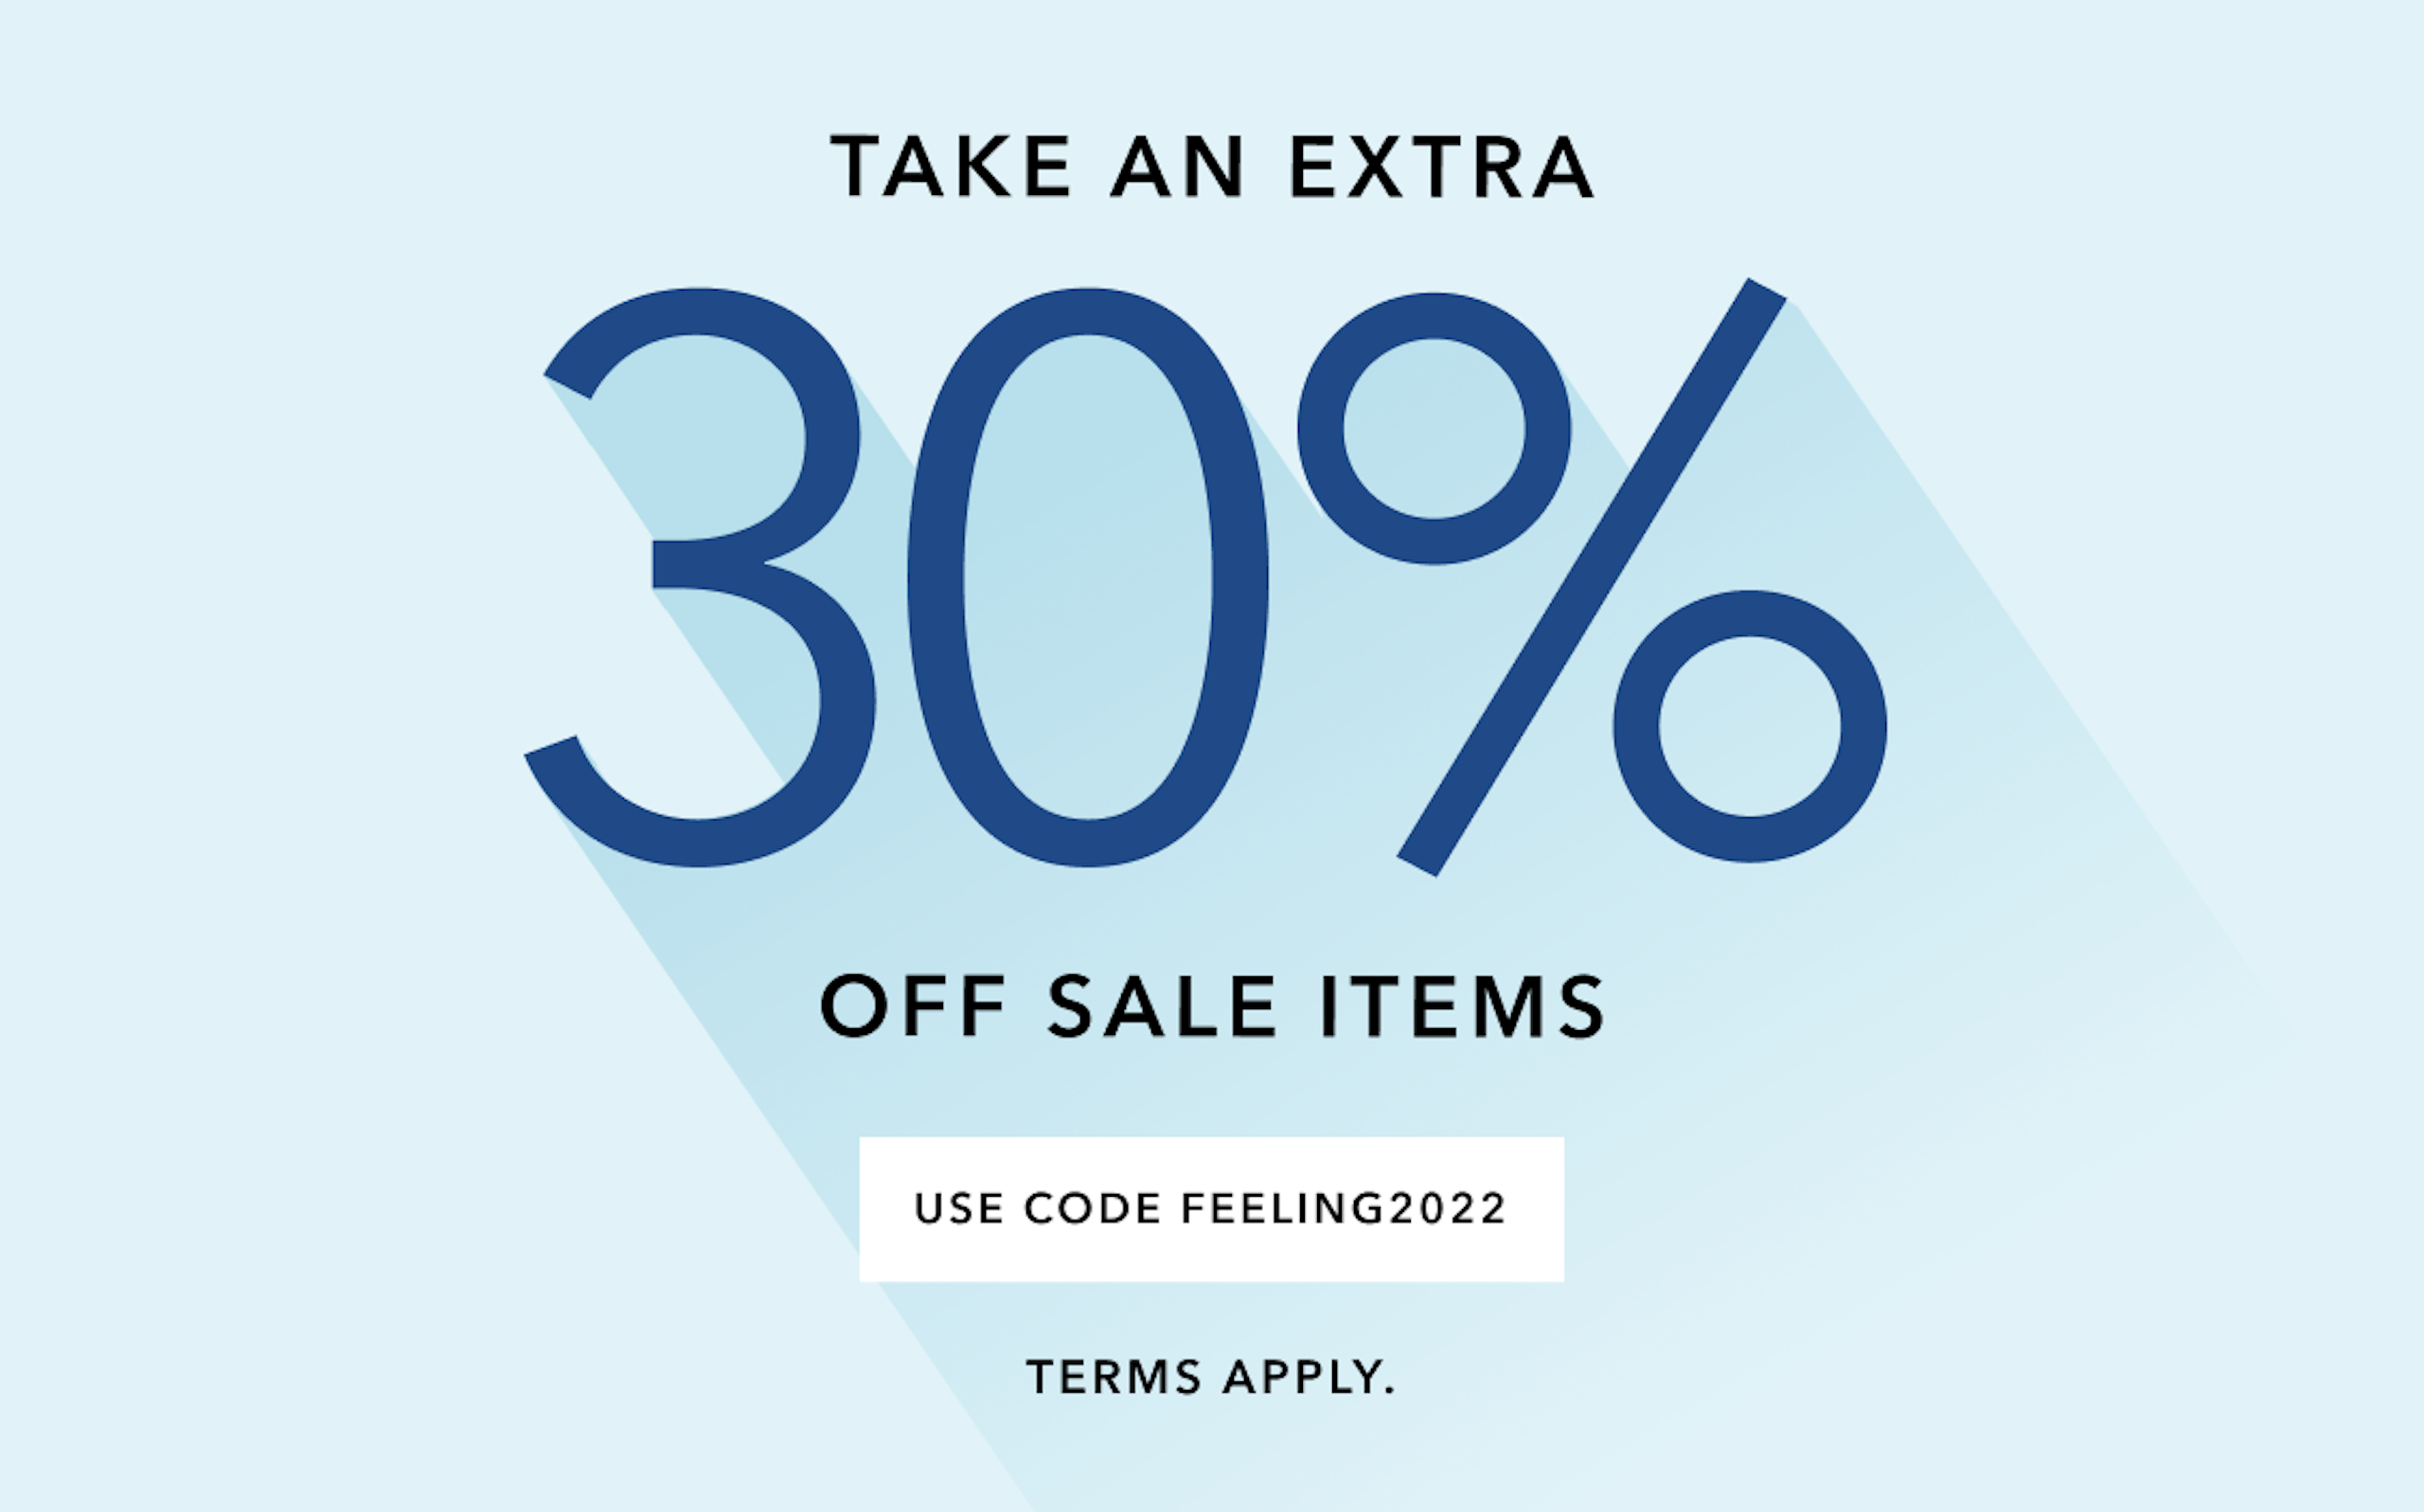 Take an Extra 30% Off Sale Items  Limited time with code FEELING2022